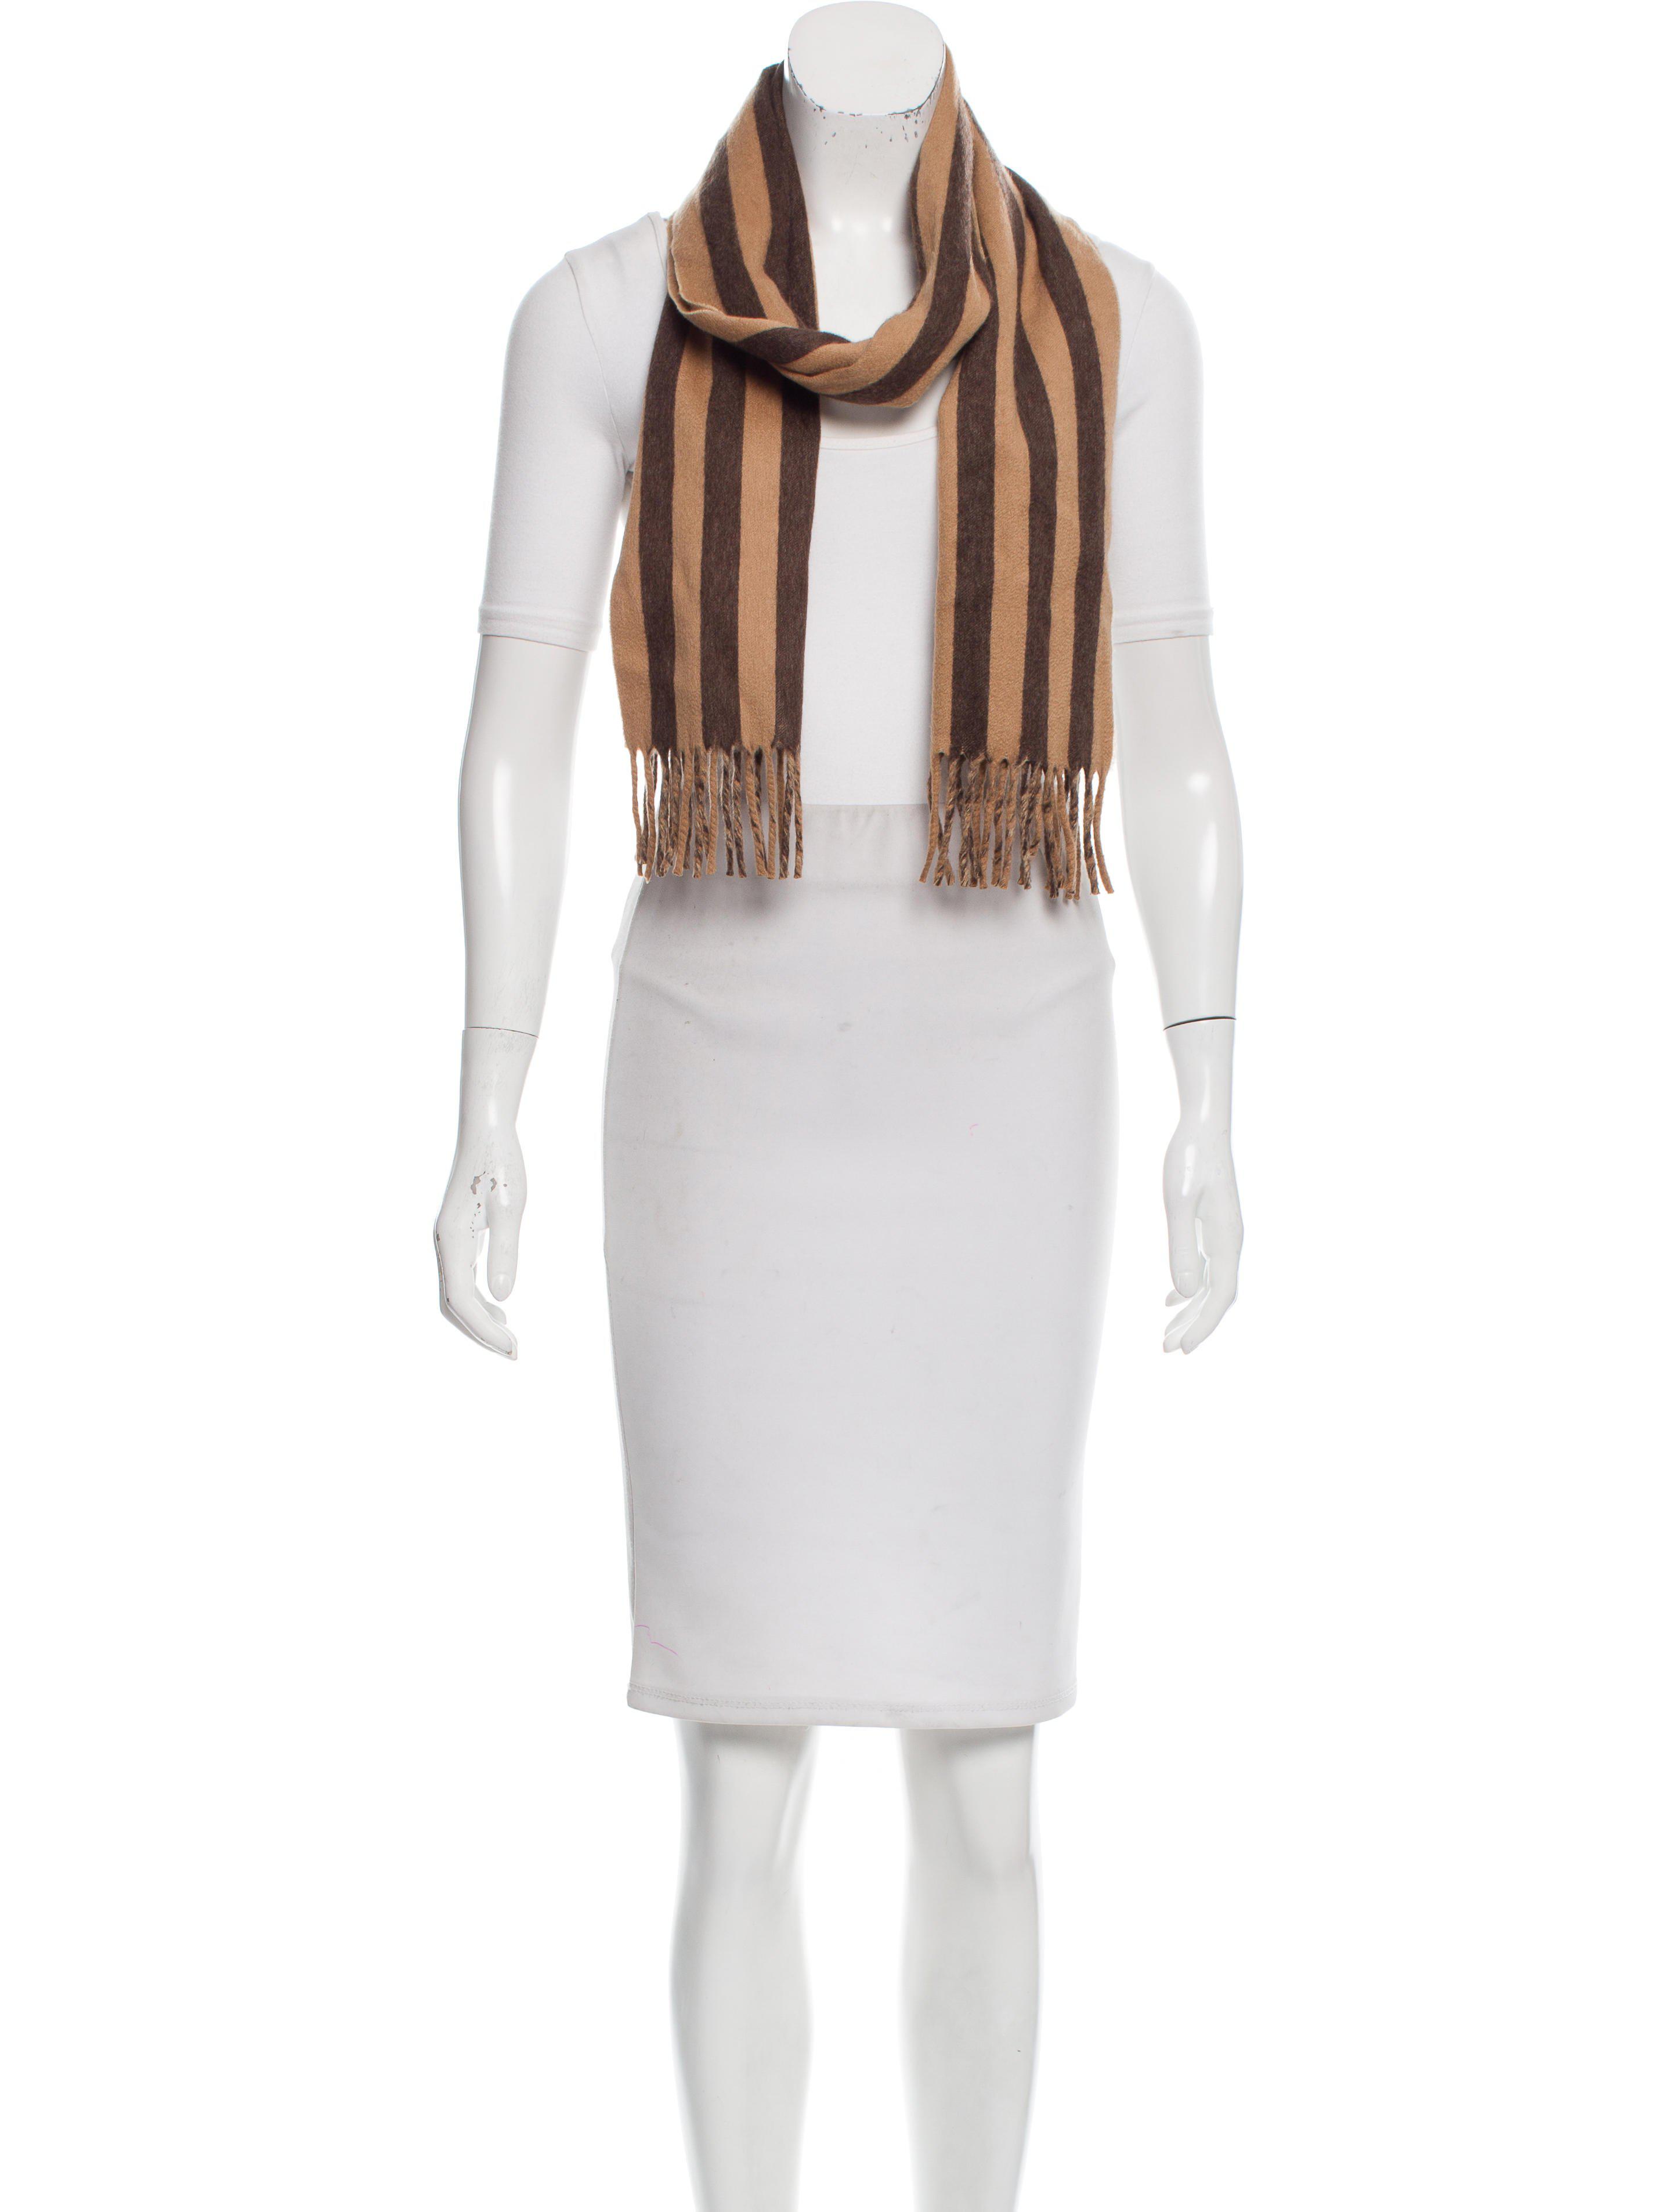 Lyst - Louis Vuitton Striped Cashmere Scarf Tan in Natural